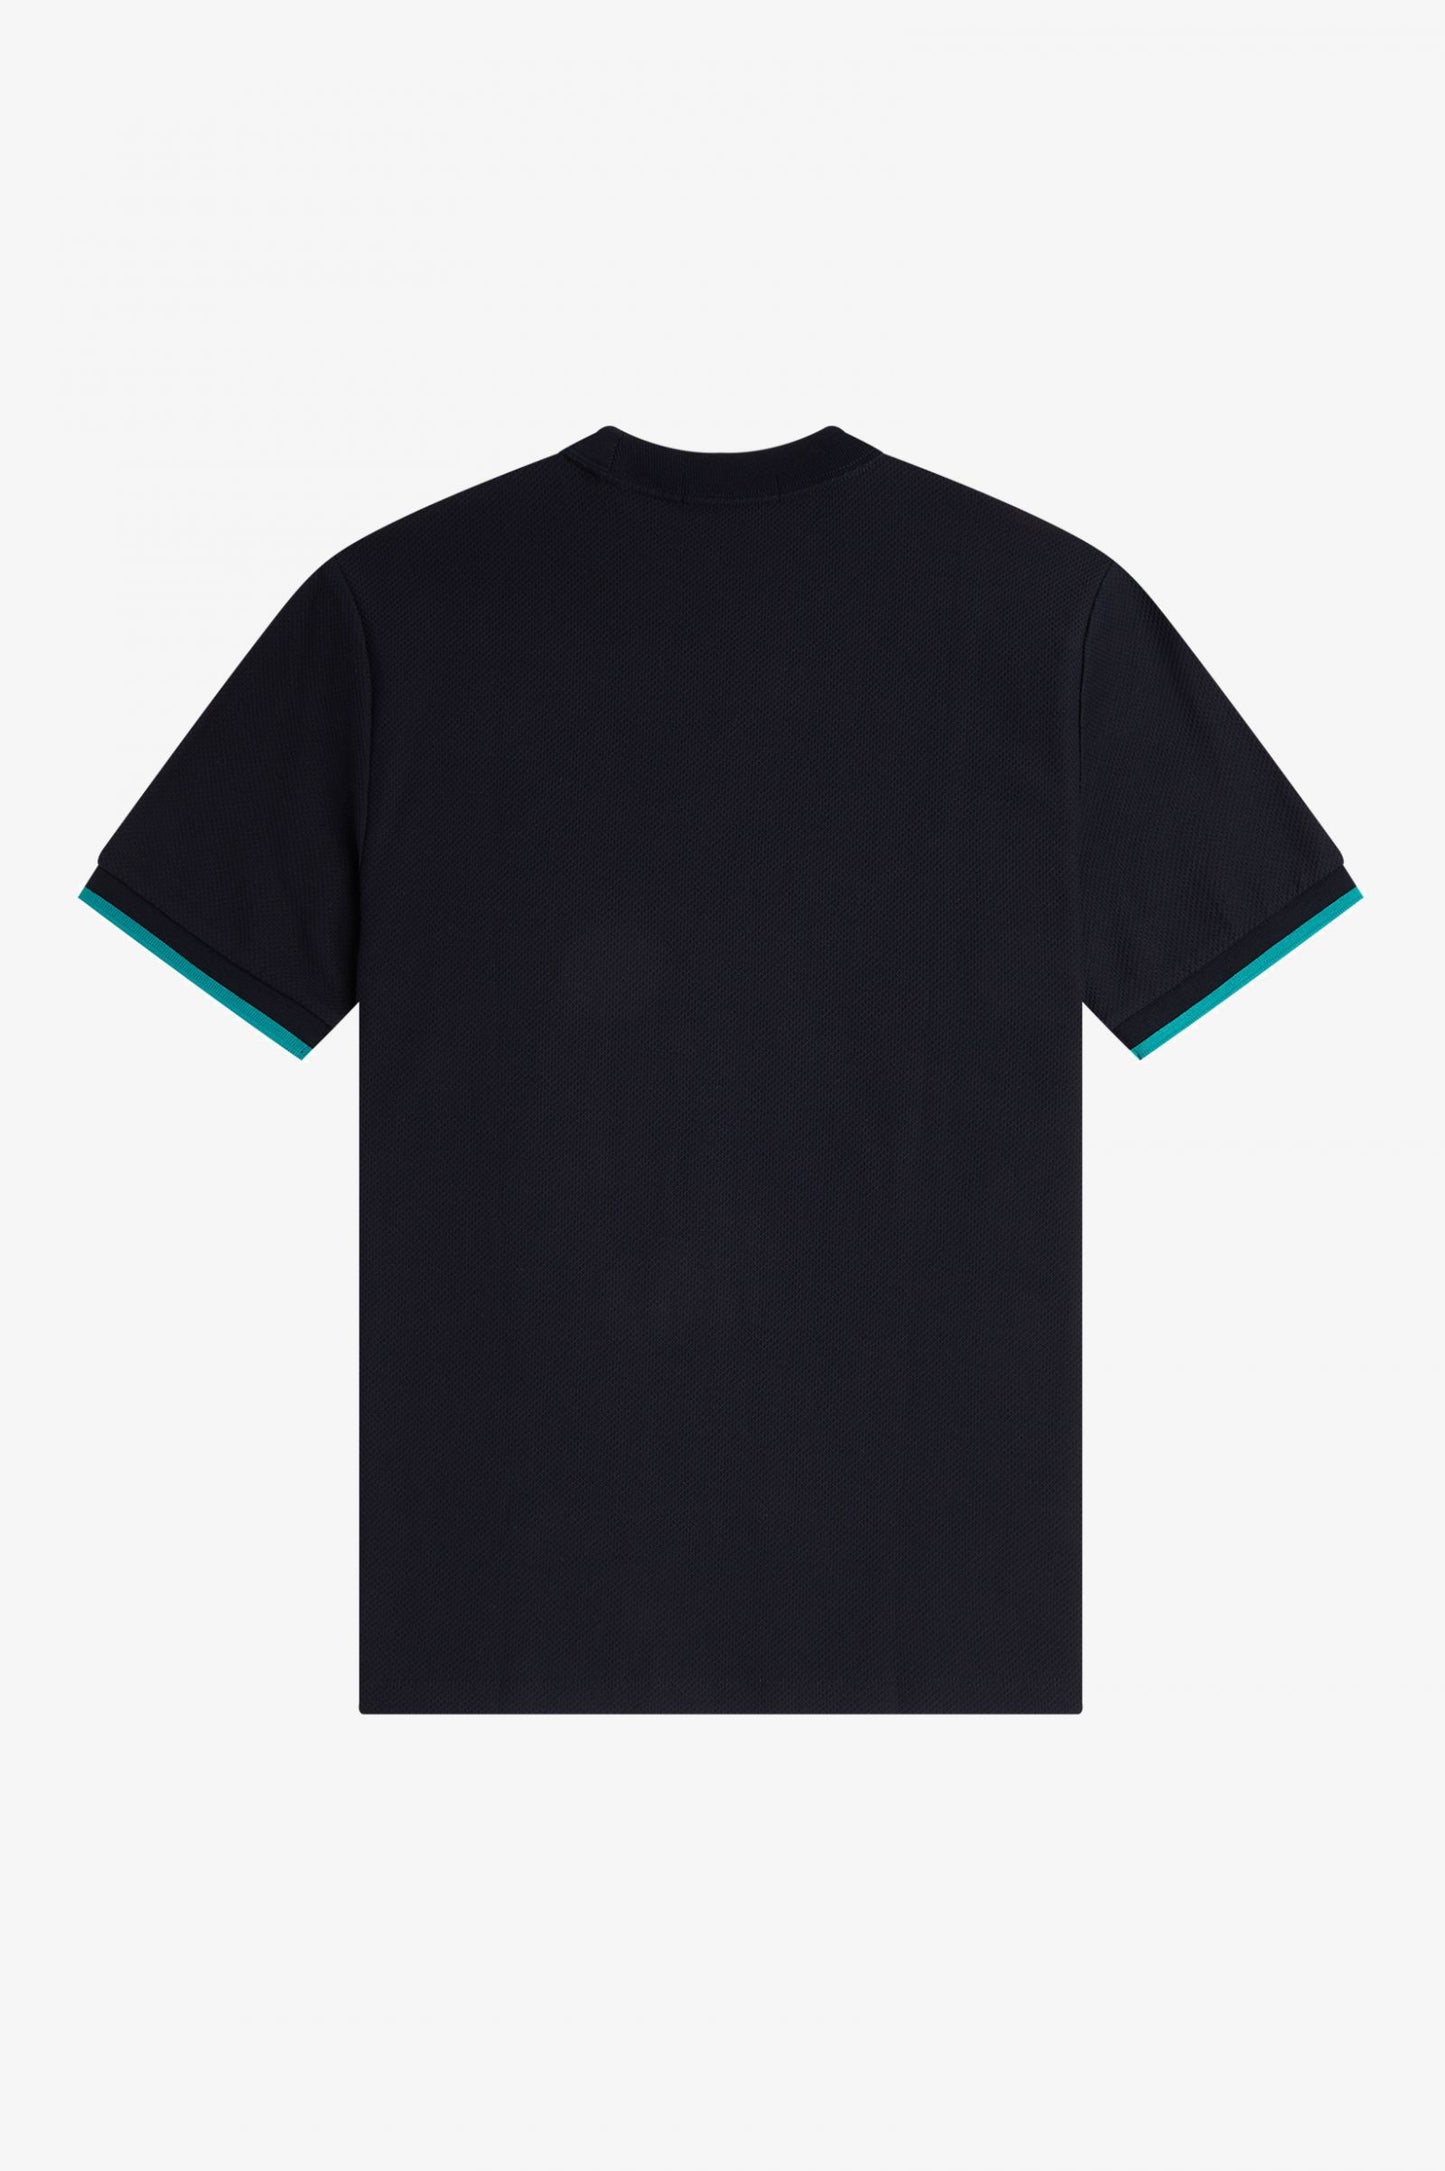 Fred Perry Tipped Cuff Pique Shirt Navy / Deep Mint